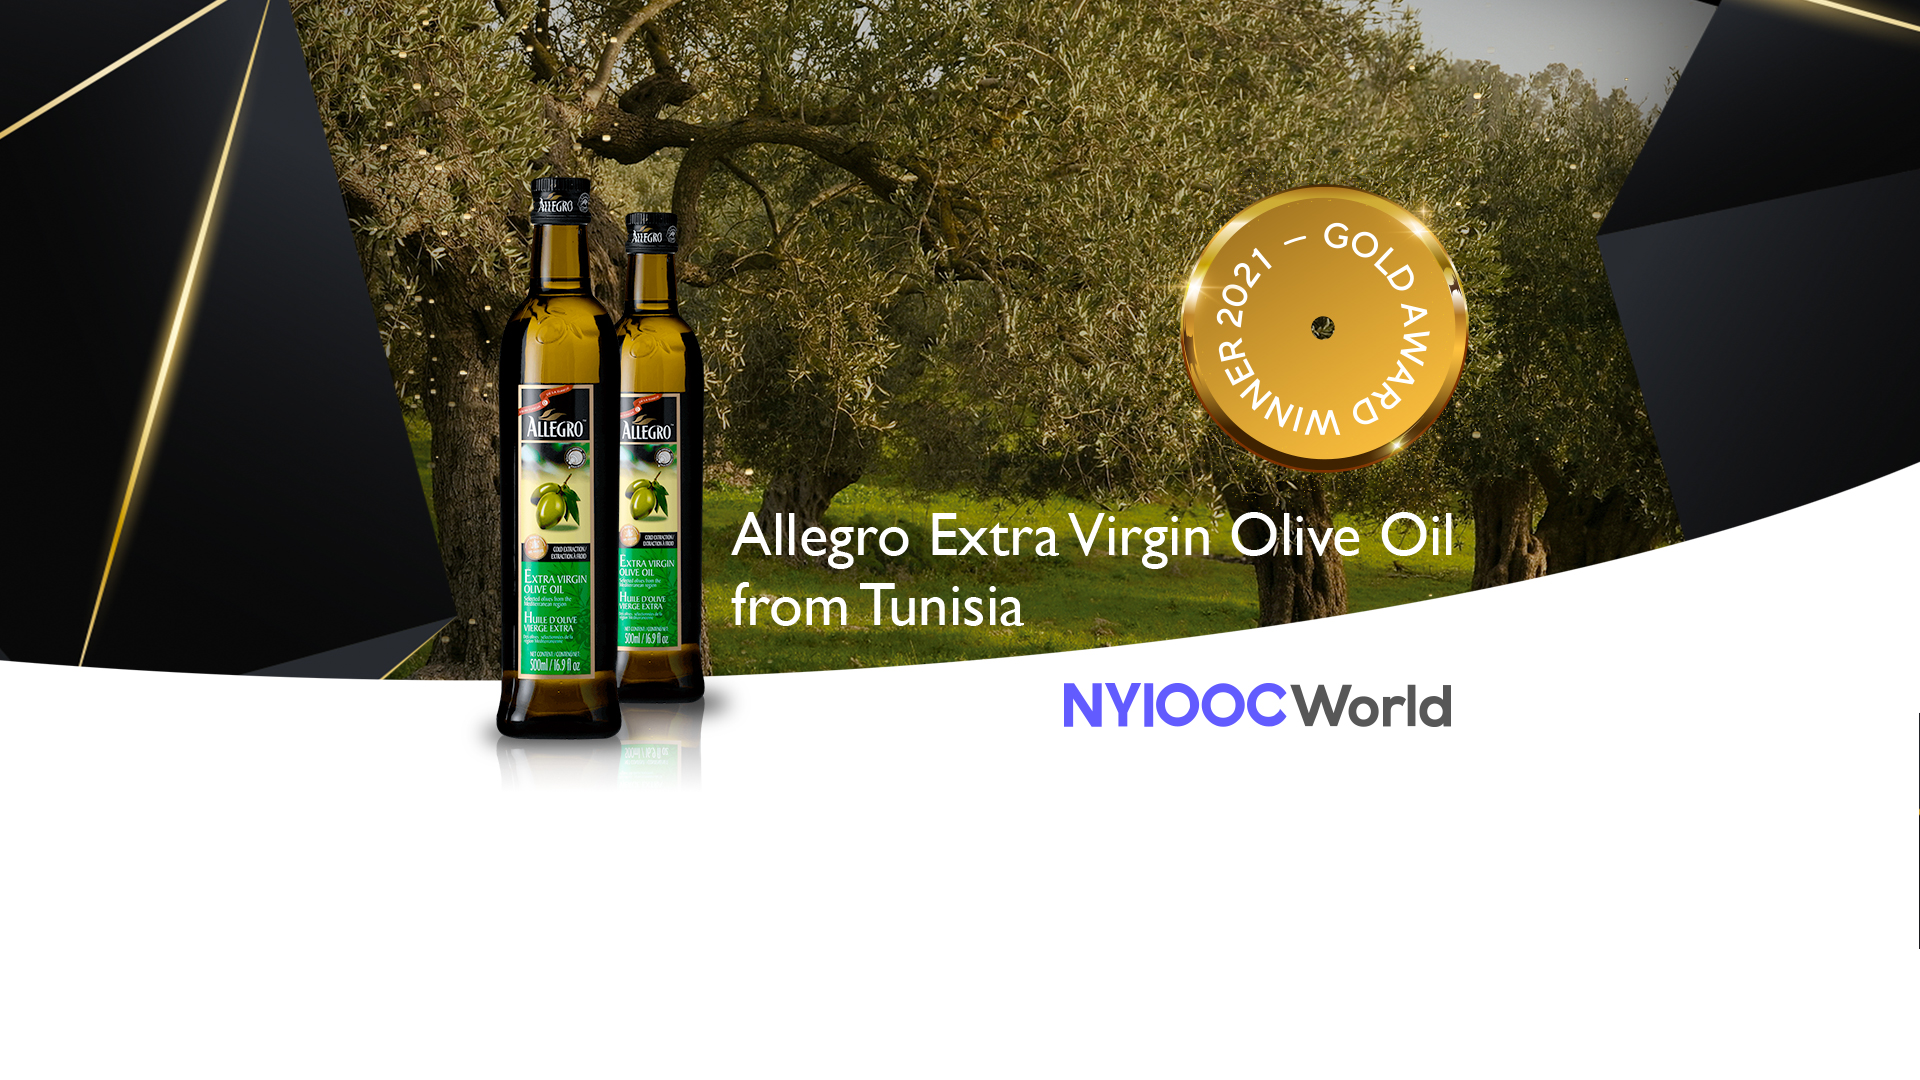 Allegro extra virgin olive oil awarded with the gold medal in NYIOOC